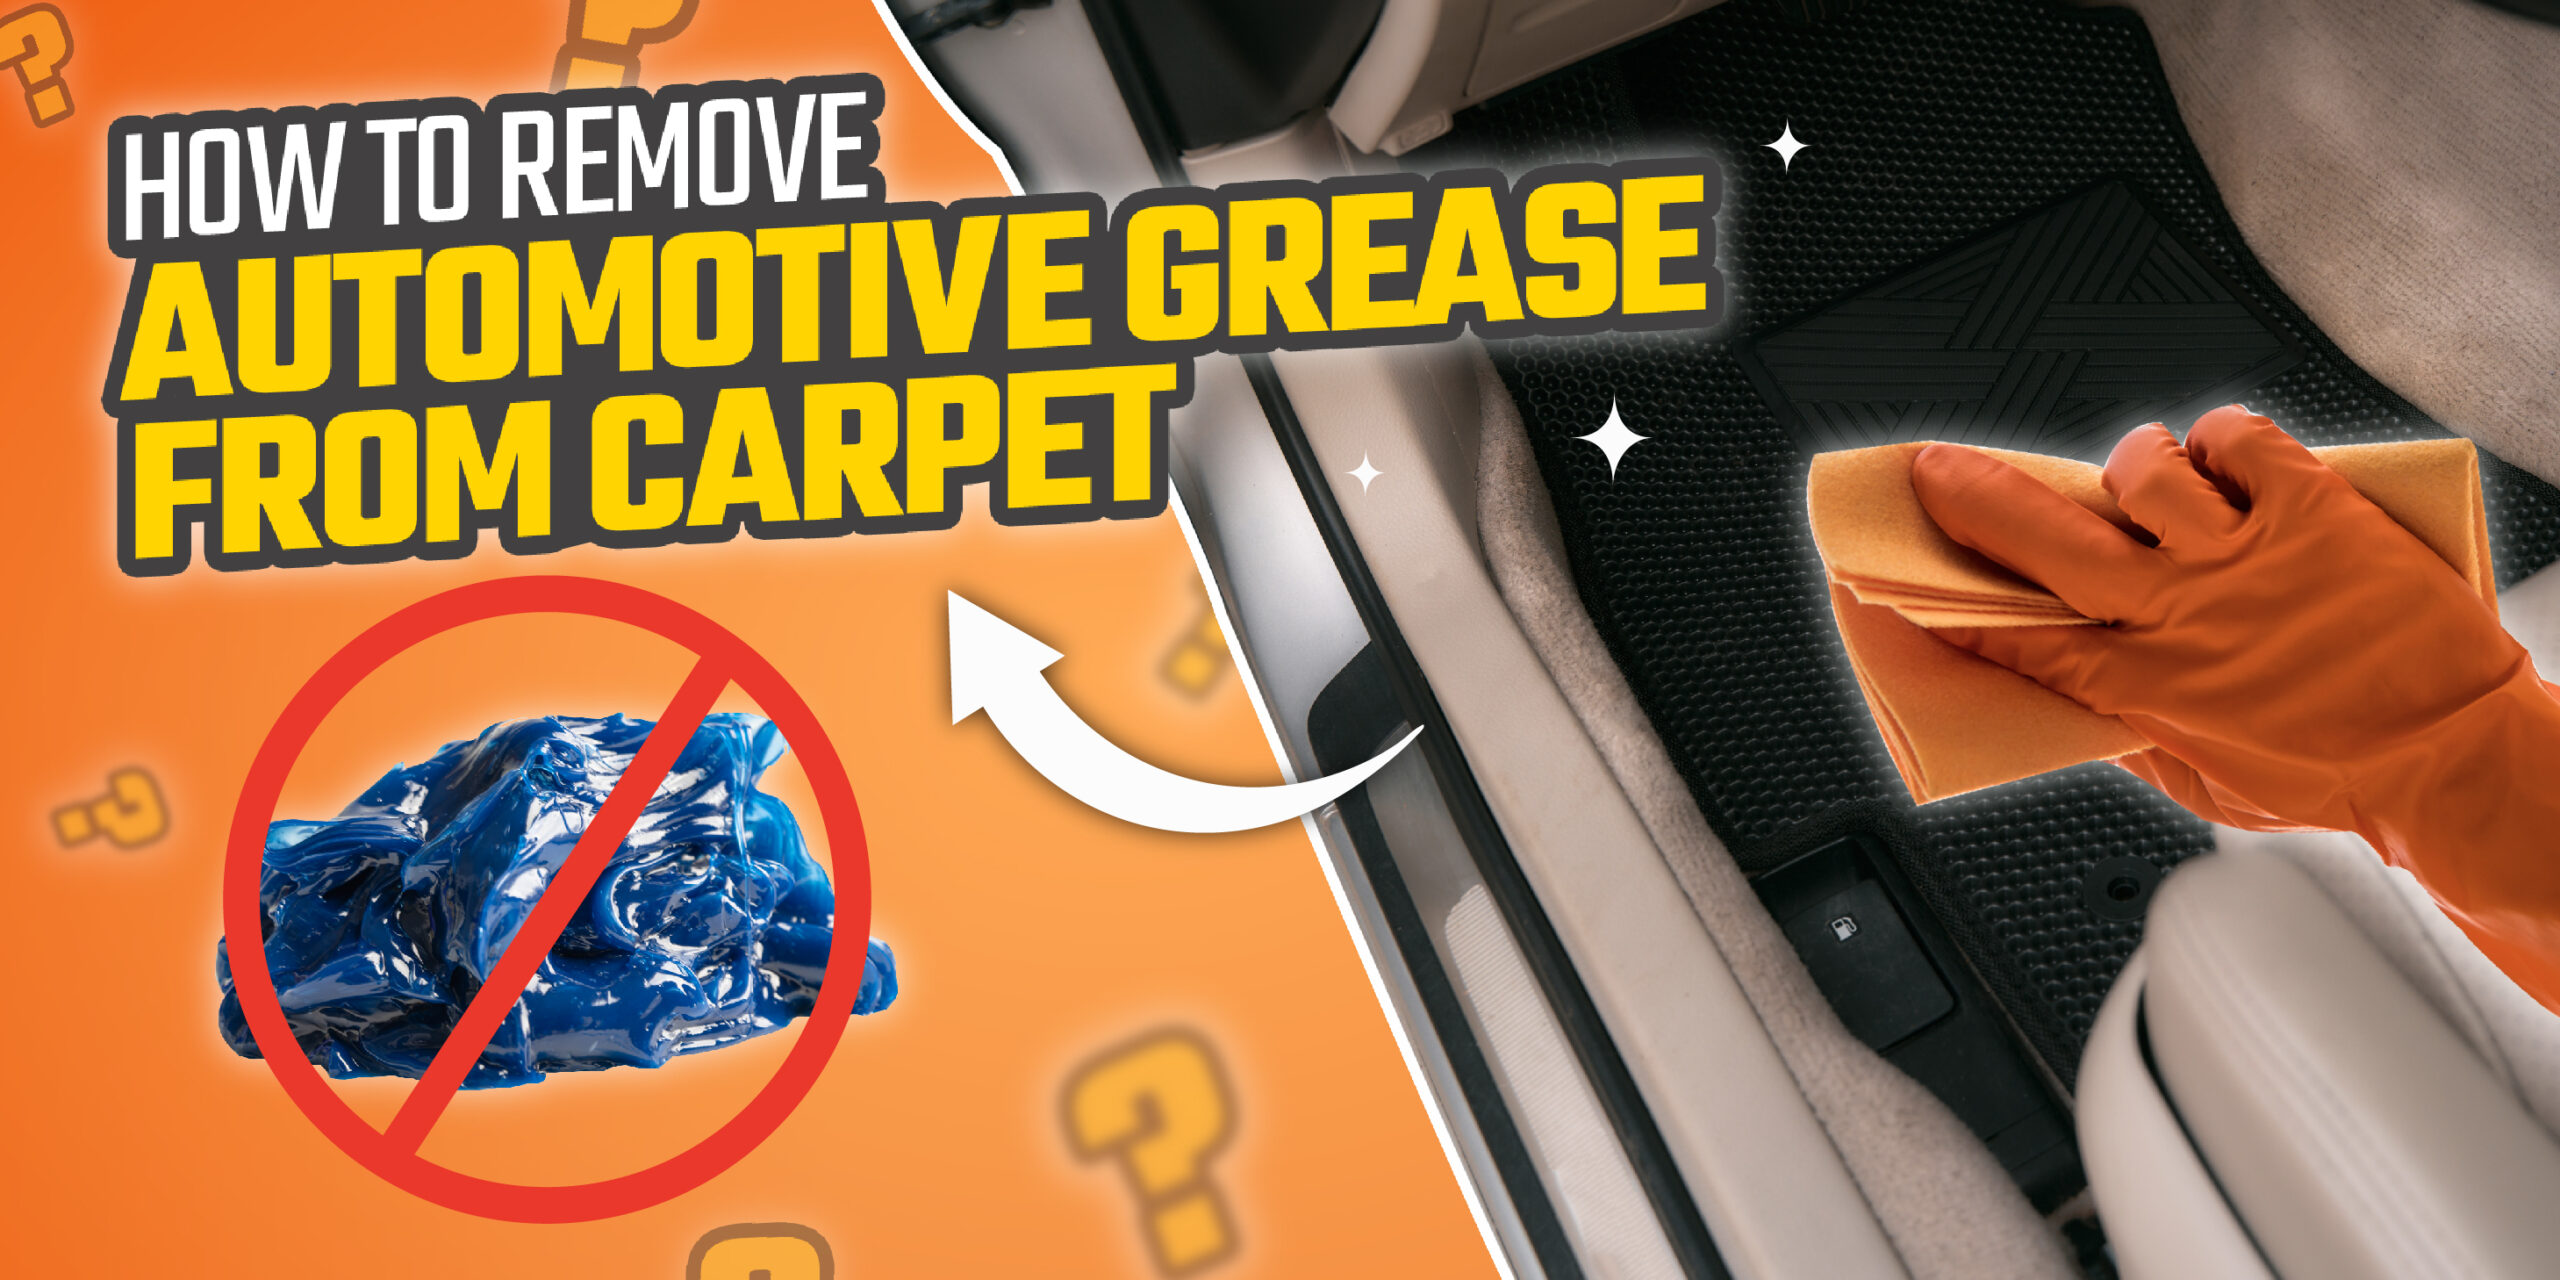 How to remove automotive grease from carpet